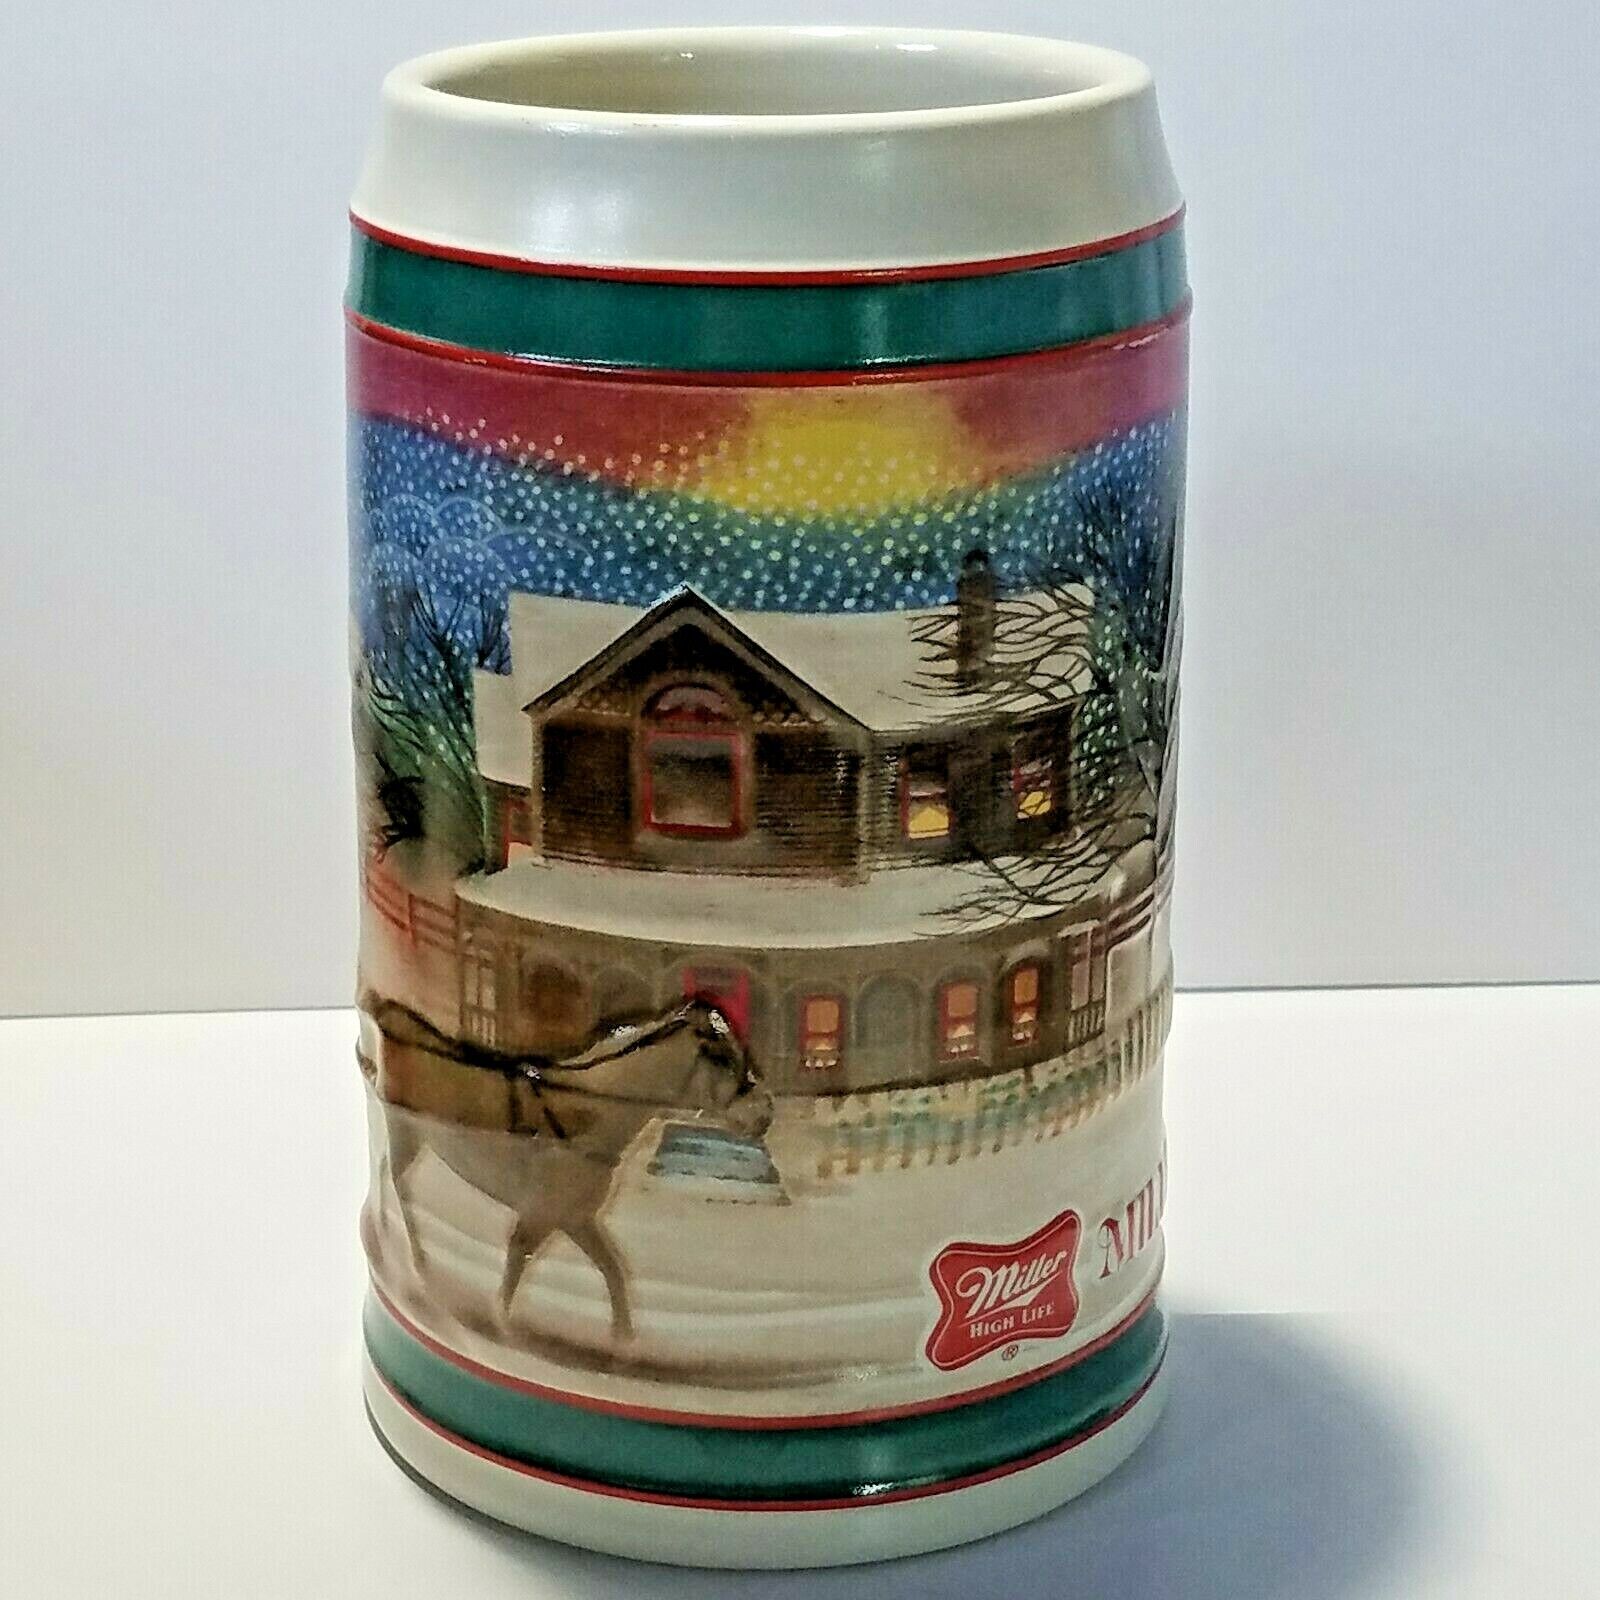 Miller High Life Beer Mug To The Best Holiday Traditions Chris...